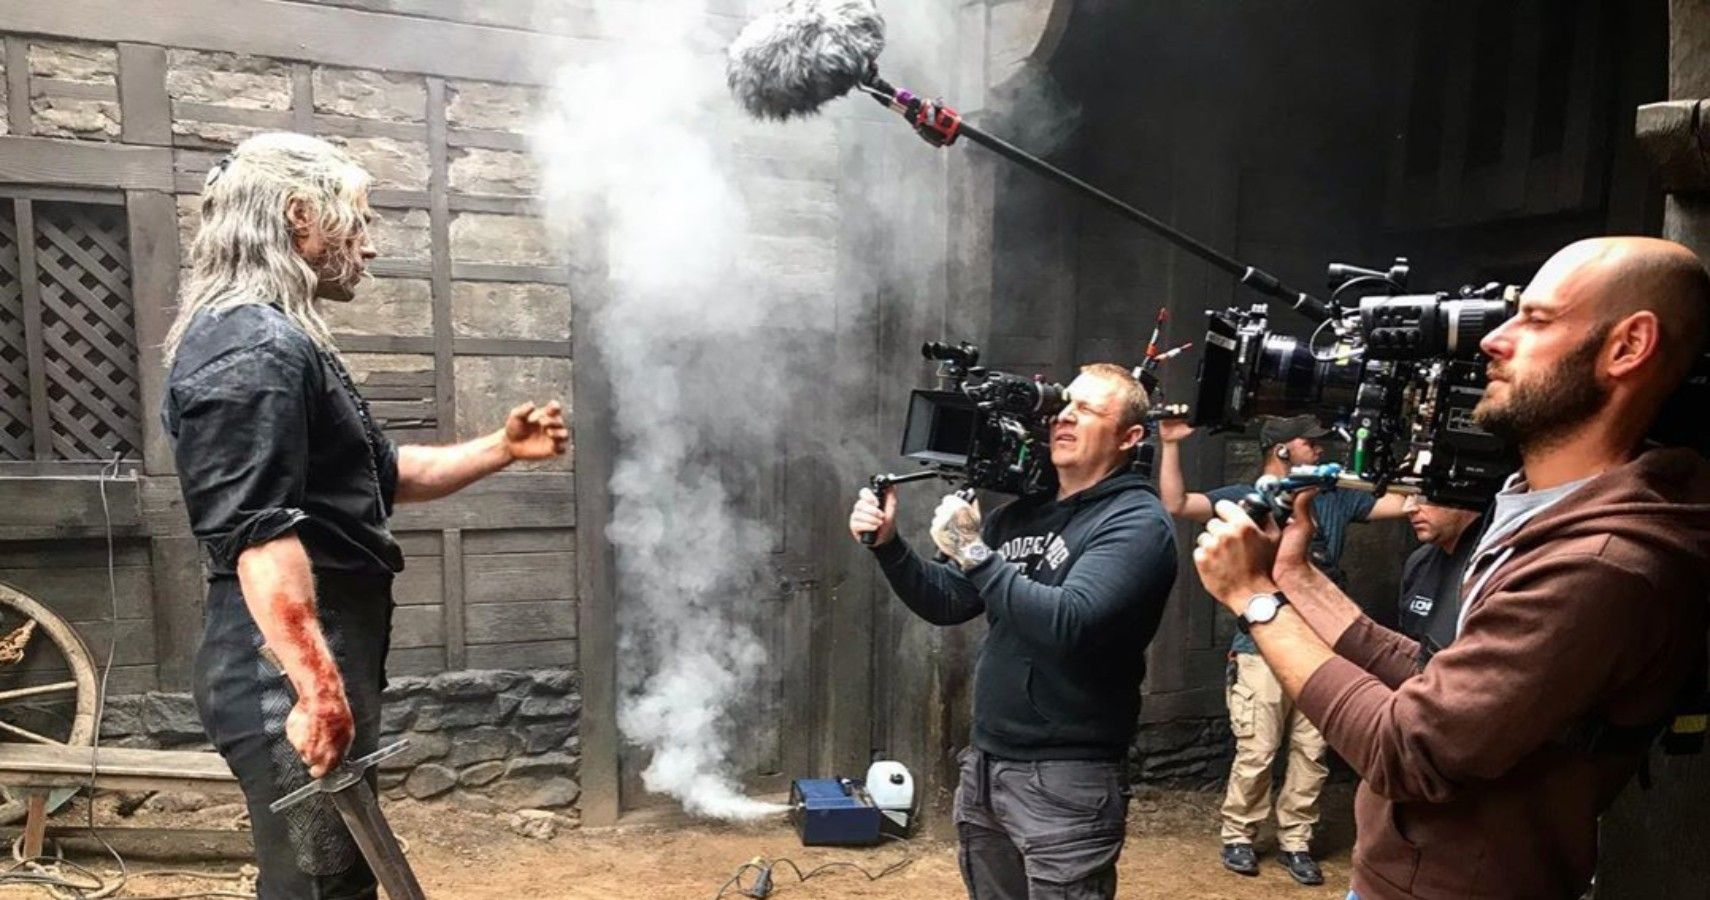 the-witcher-geralt-of-rivia-henry-cavill-steadicam-behind-the-scenes - Edited (1)